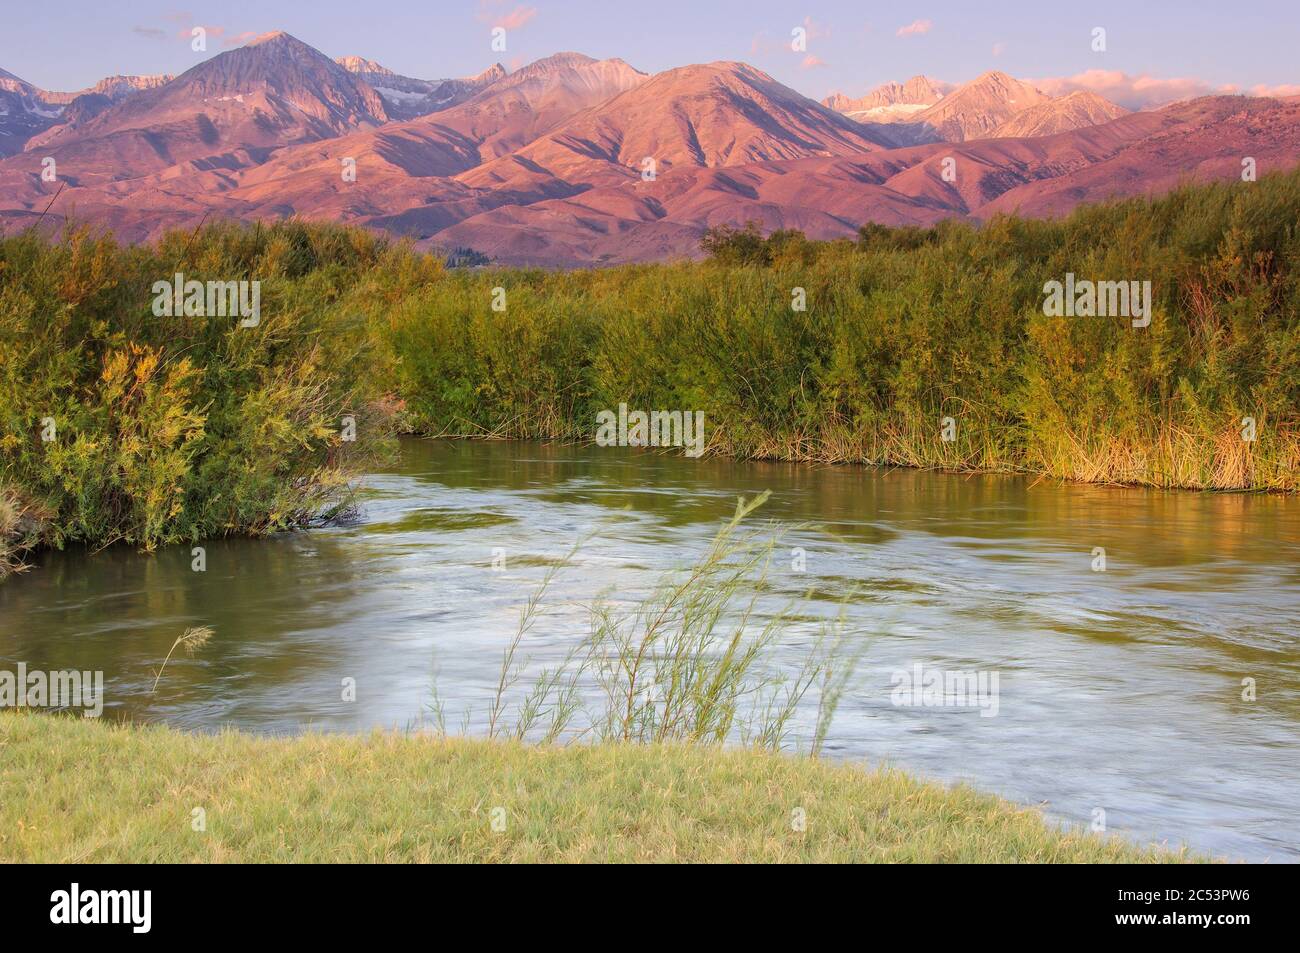 Eastern Sierra Nevada from the Owens River, California Stock Photo